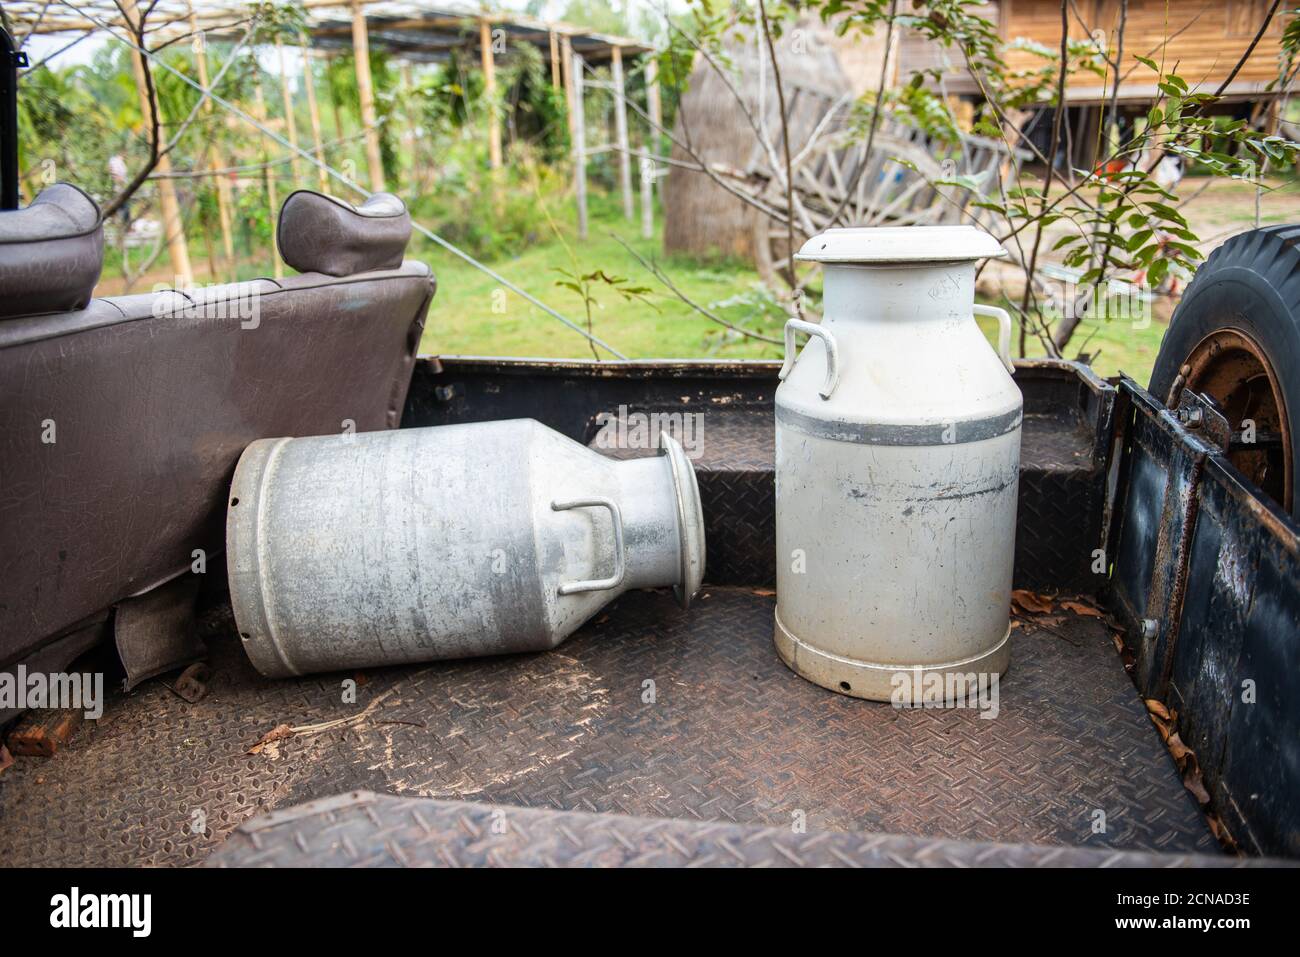 Old milk can in farm.old milk canisters at a farm. Stock Photo